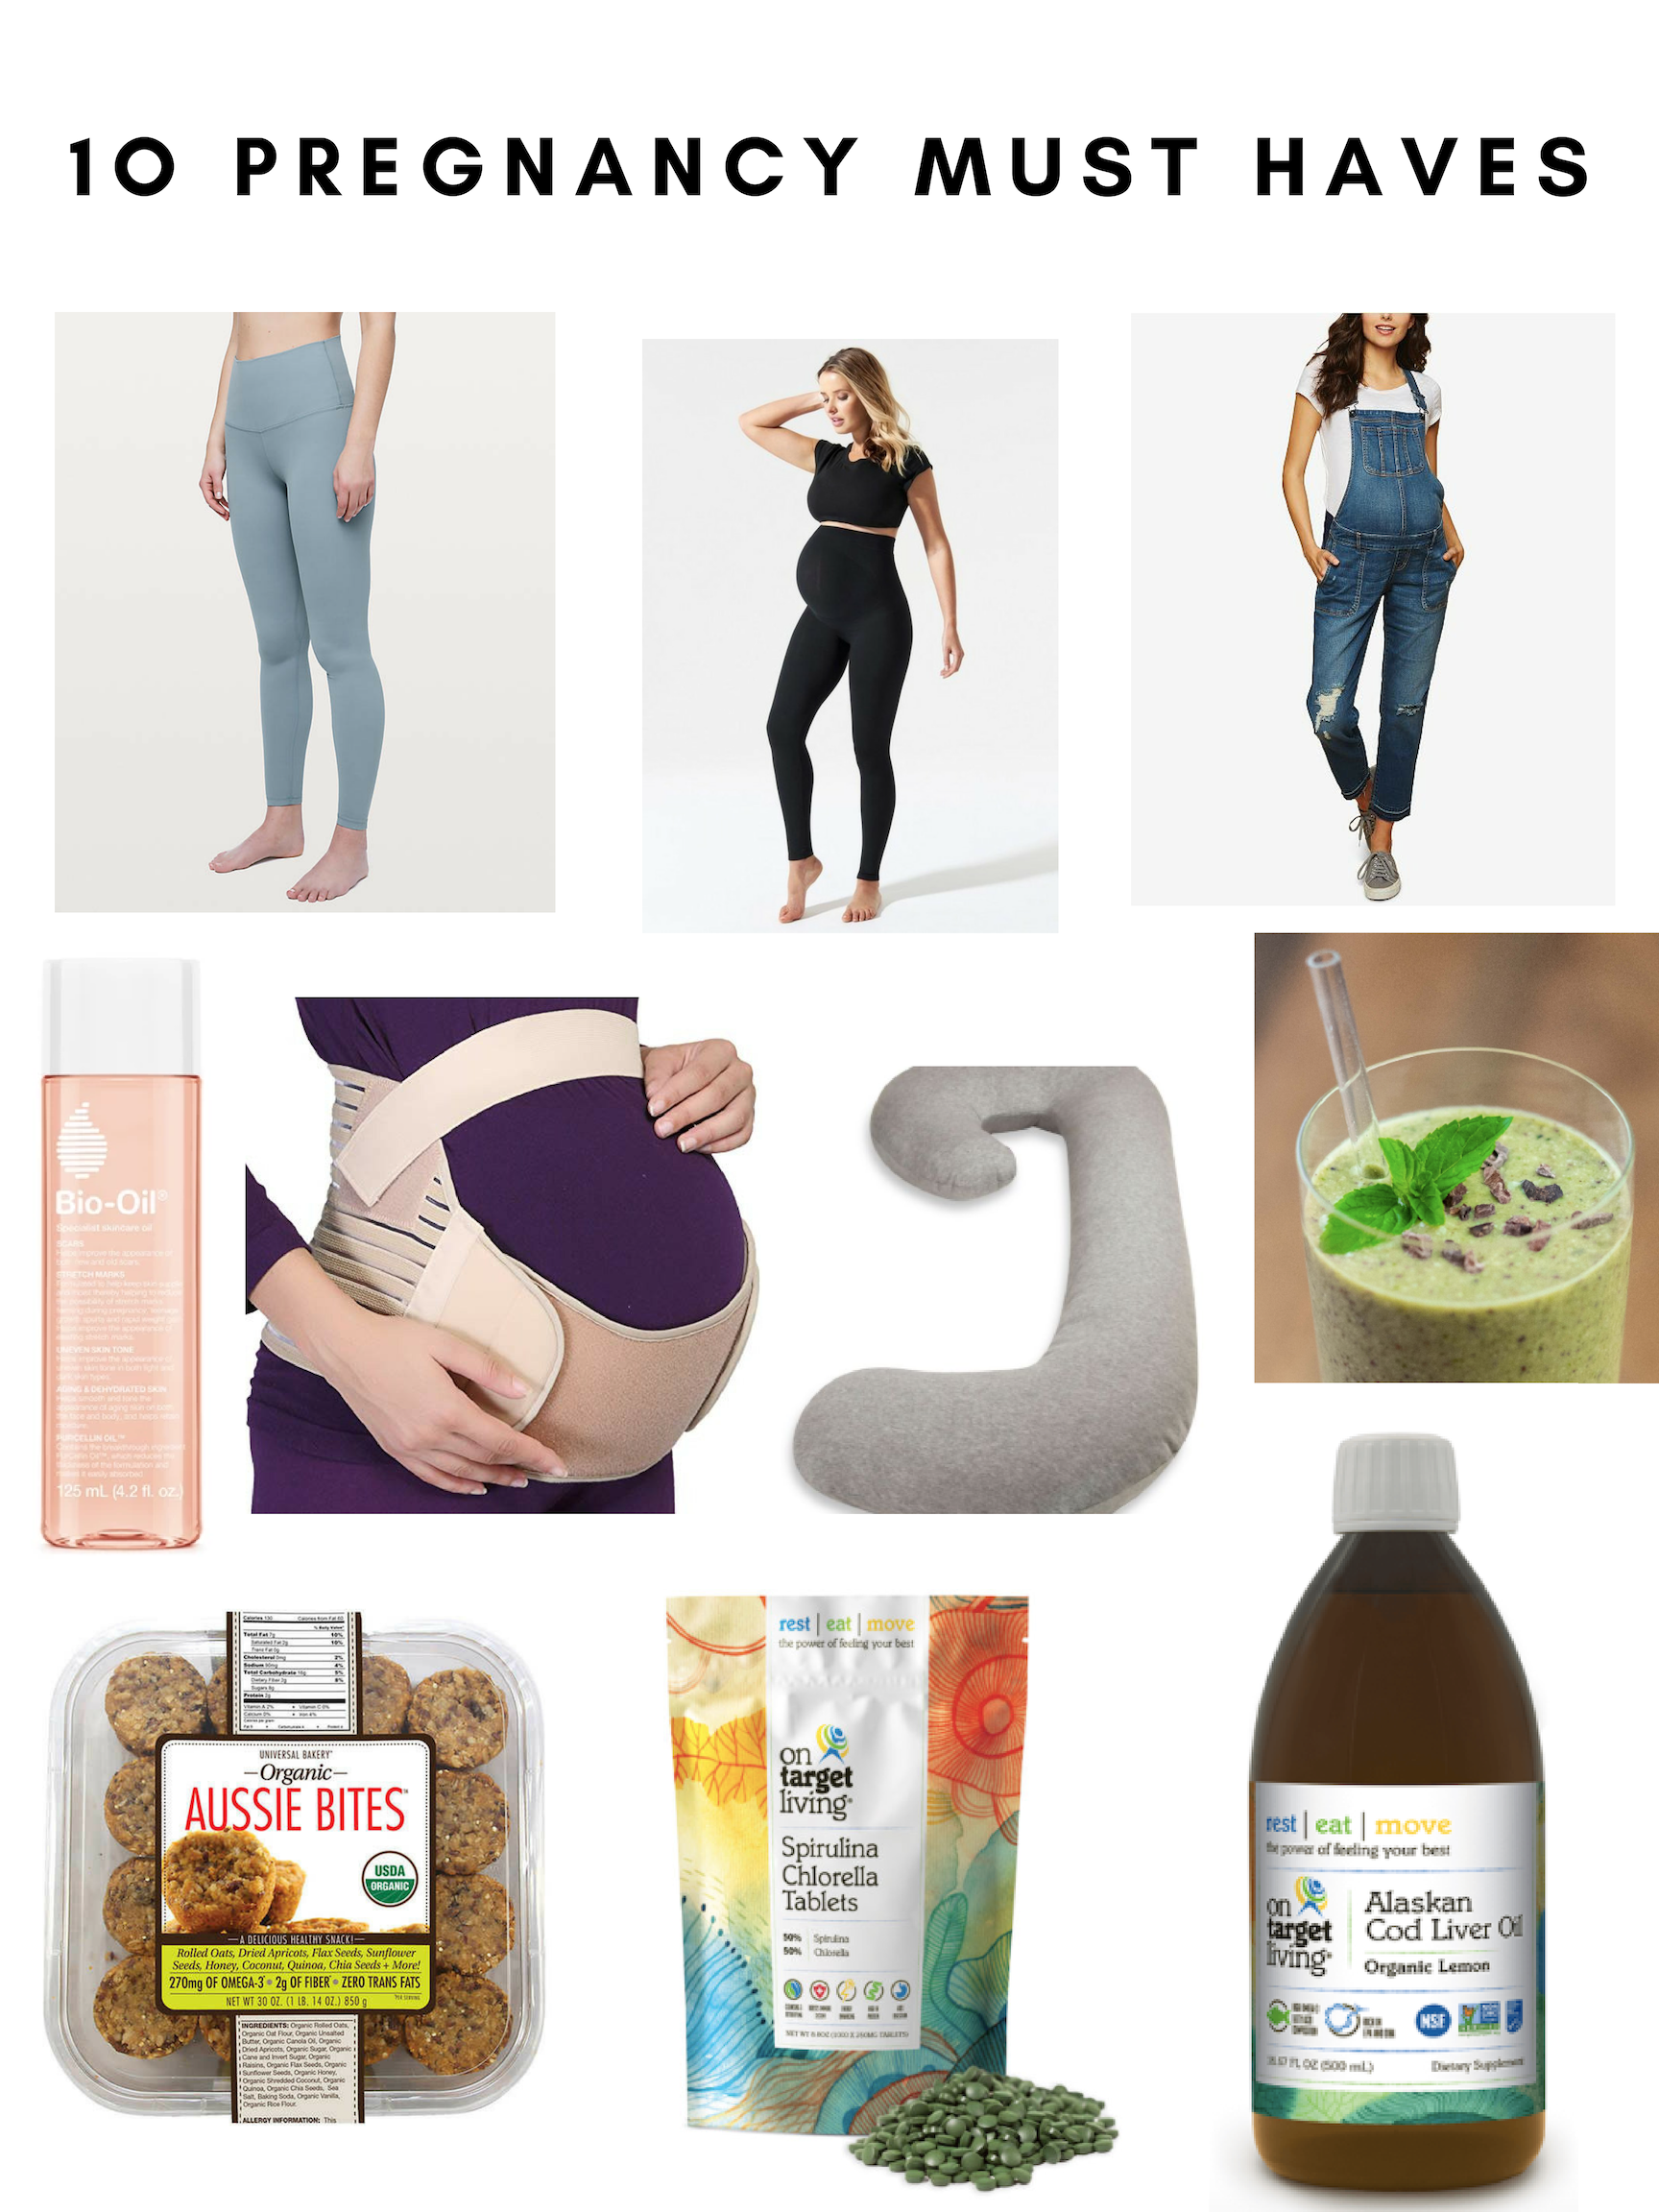 10 Pregnancy Must-Haves You'll Be Glad You Scored During After